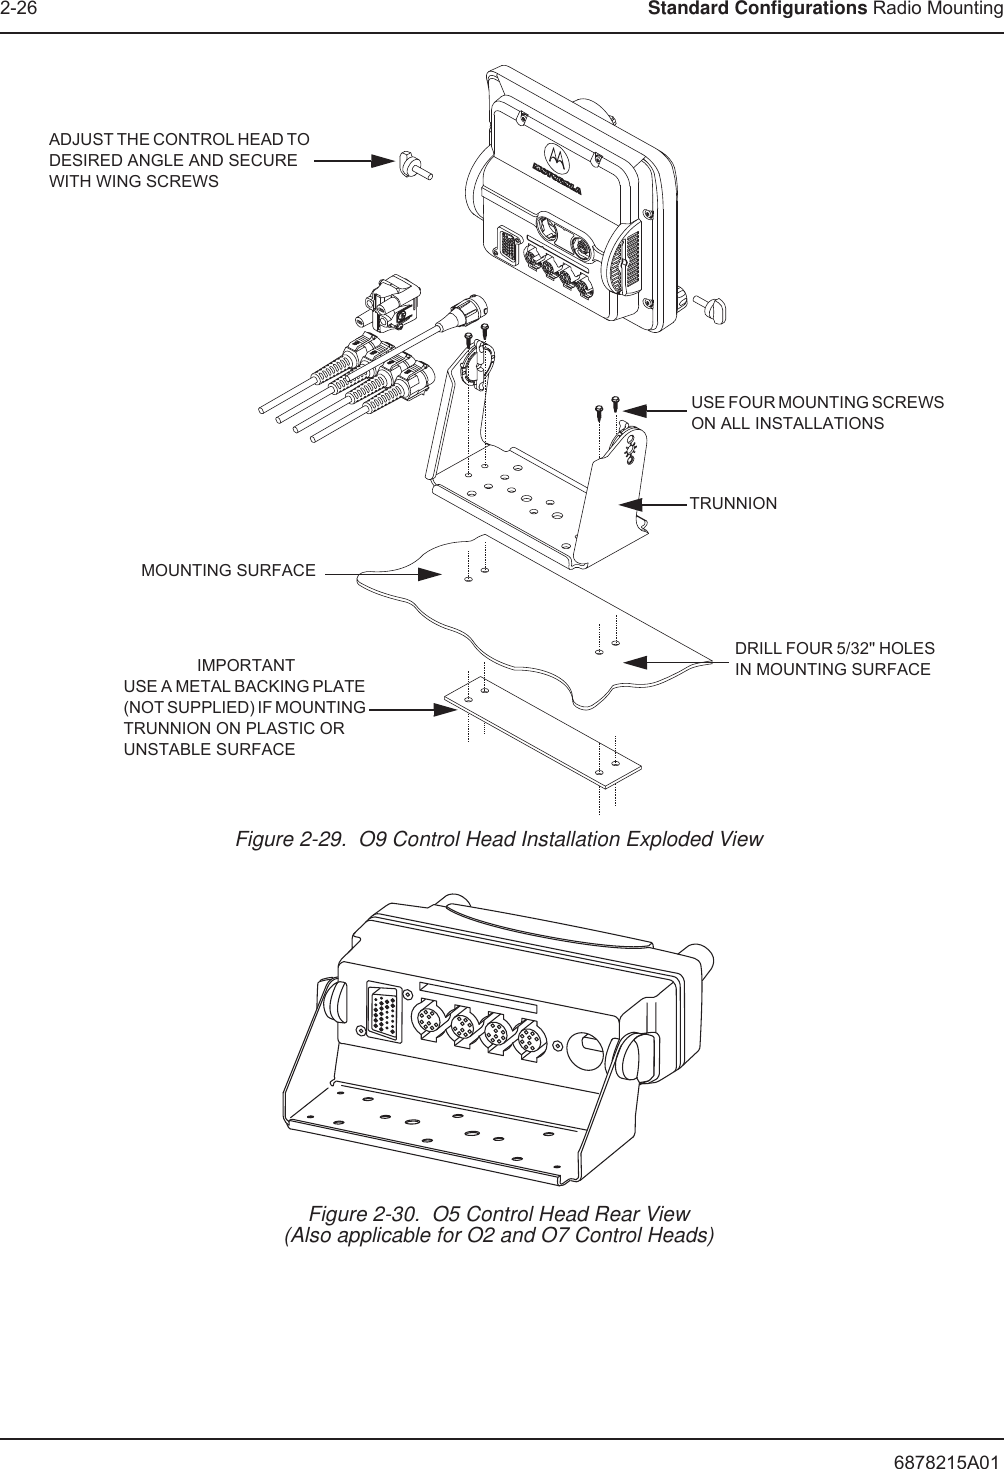 6878215A012-26 Standard Configurations Radio MountingFigure 2-29.  O9 Control Head Installation Exploded ViewFigure 2-30.  O5 Control Head Rear View(Also applicable for O2 and O7 Control Heads)ADJUST THE CONTROL HEAD TO DESIRED ANGLE AND SECURE WITH WING SCREWSUSE FOUR MOUNTING SCREWS ON ALL INSTALLATIONSTRUNNIONDRILL FOUR 5/32&apos;&apos; HOLES IN MOUNTING SURFACEMOUNTING SURFACEIMPORTANTUSE A METAL BACKING PLATE (NOT SUPPLIED) IF MOUNTING TRUNNION ON PLASTIC OR UNSTABLE SURFACE